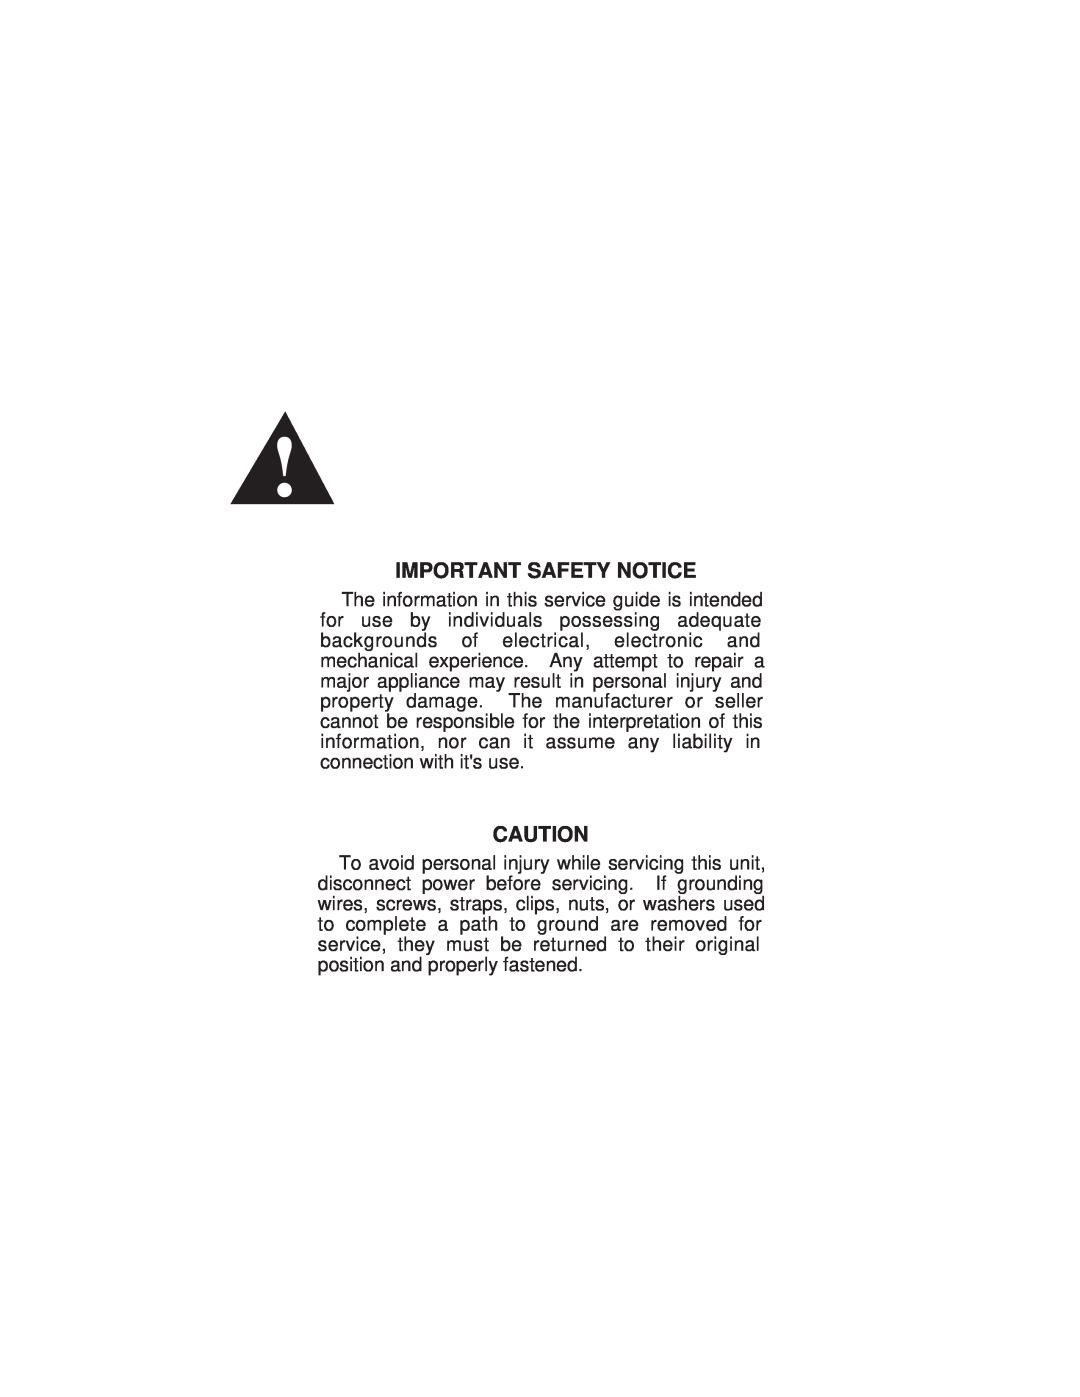 GE JGBP90 A, JGBP85 A, JGBP79 A, JGBP86 A, JGBP35 A, JGBP26 A, JGBP30 A manual Important Safety Notice 